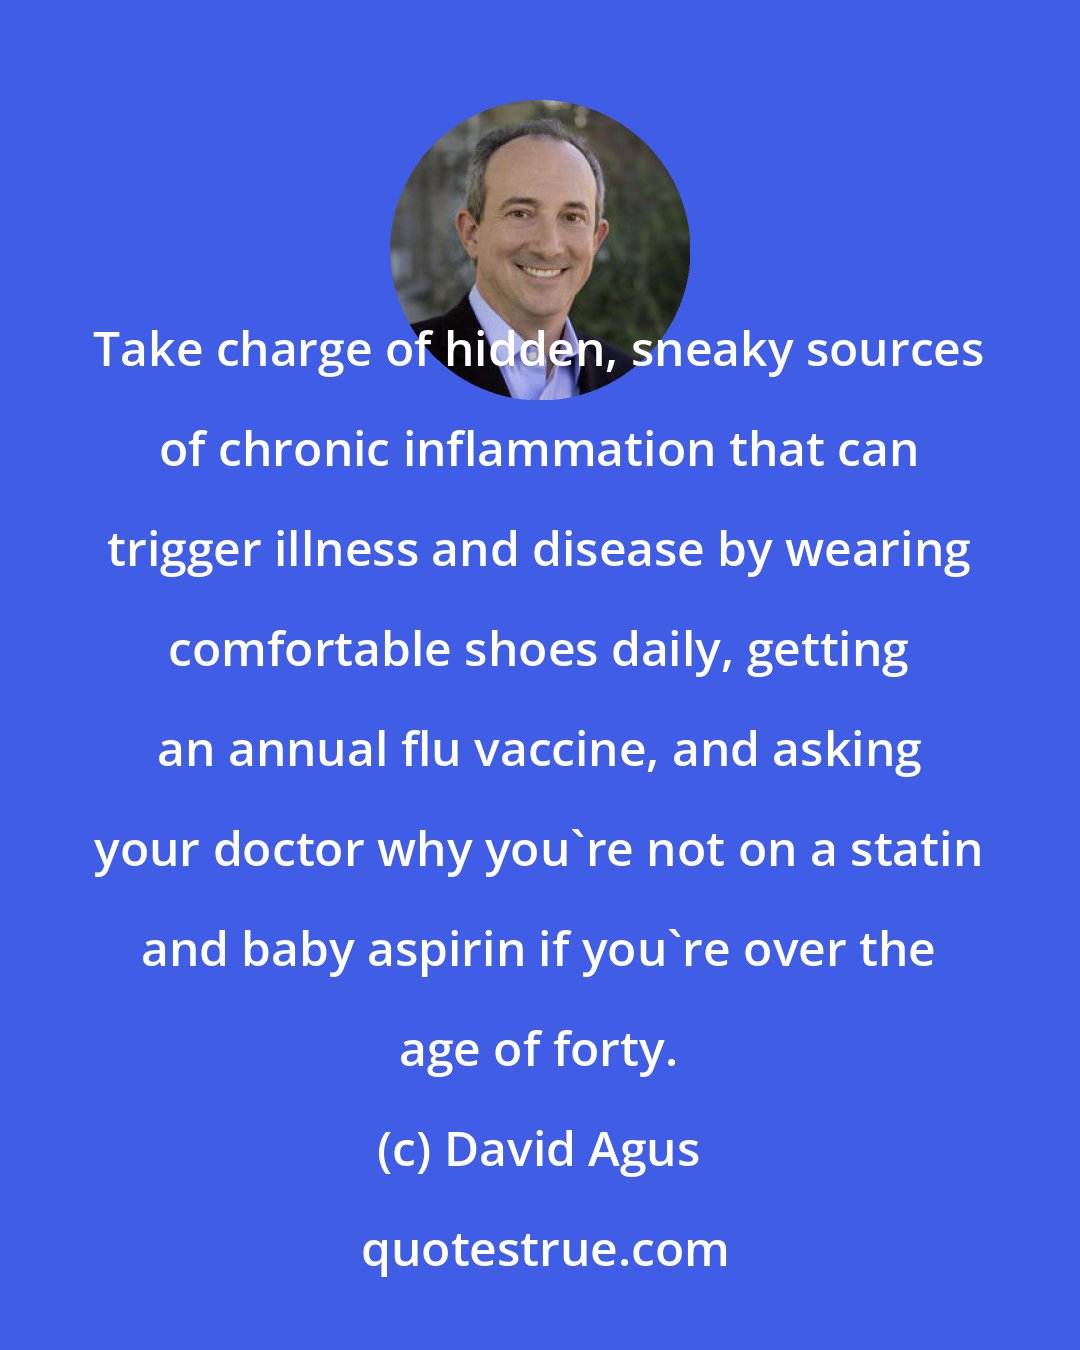 David Agus: Take charge of hidden, sneaky sources of chronic inflammation that can trigger illness and disease by wearing comfortable shoes daily, getting an annual flu vaccine, and asking your doctor why you're not on a statin and baby aspirin if you're over the age of forty.